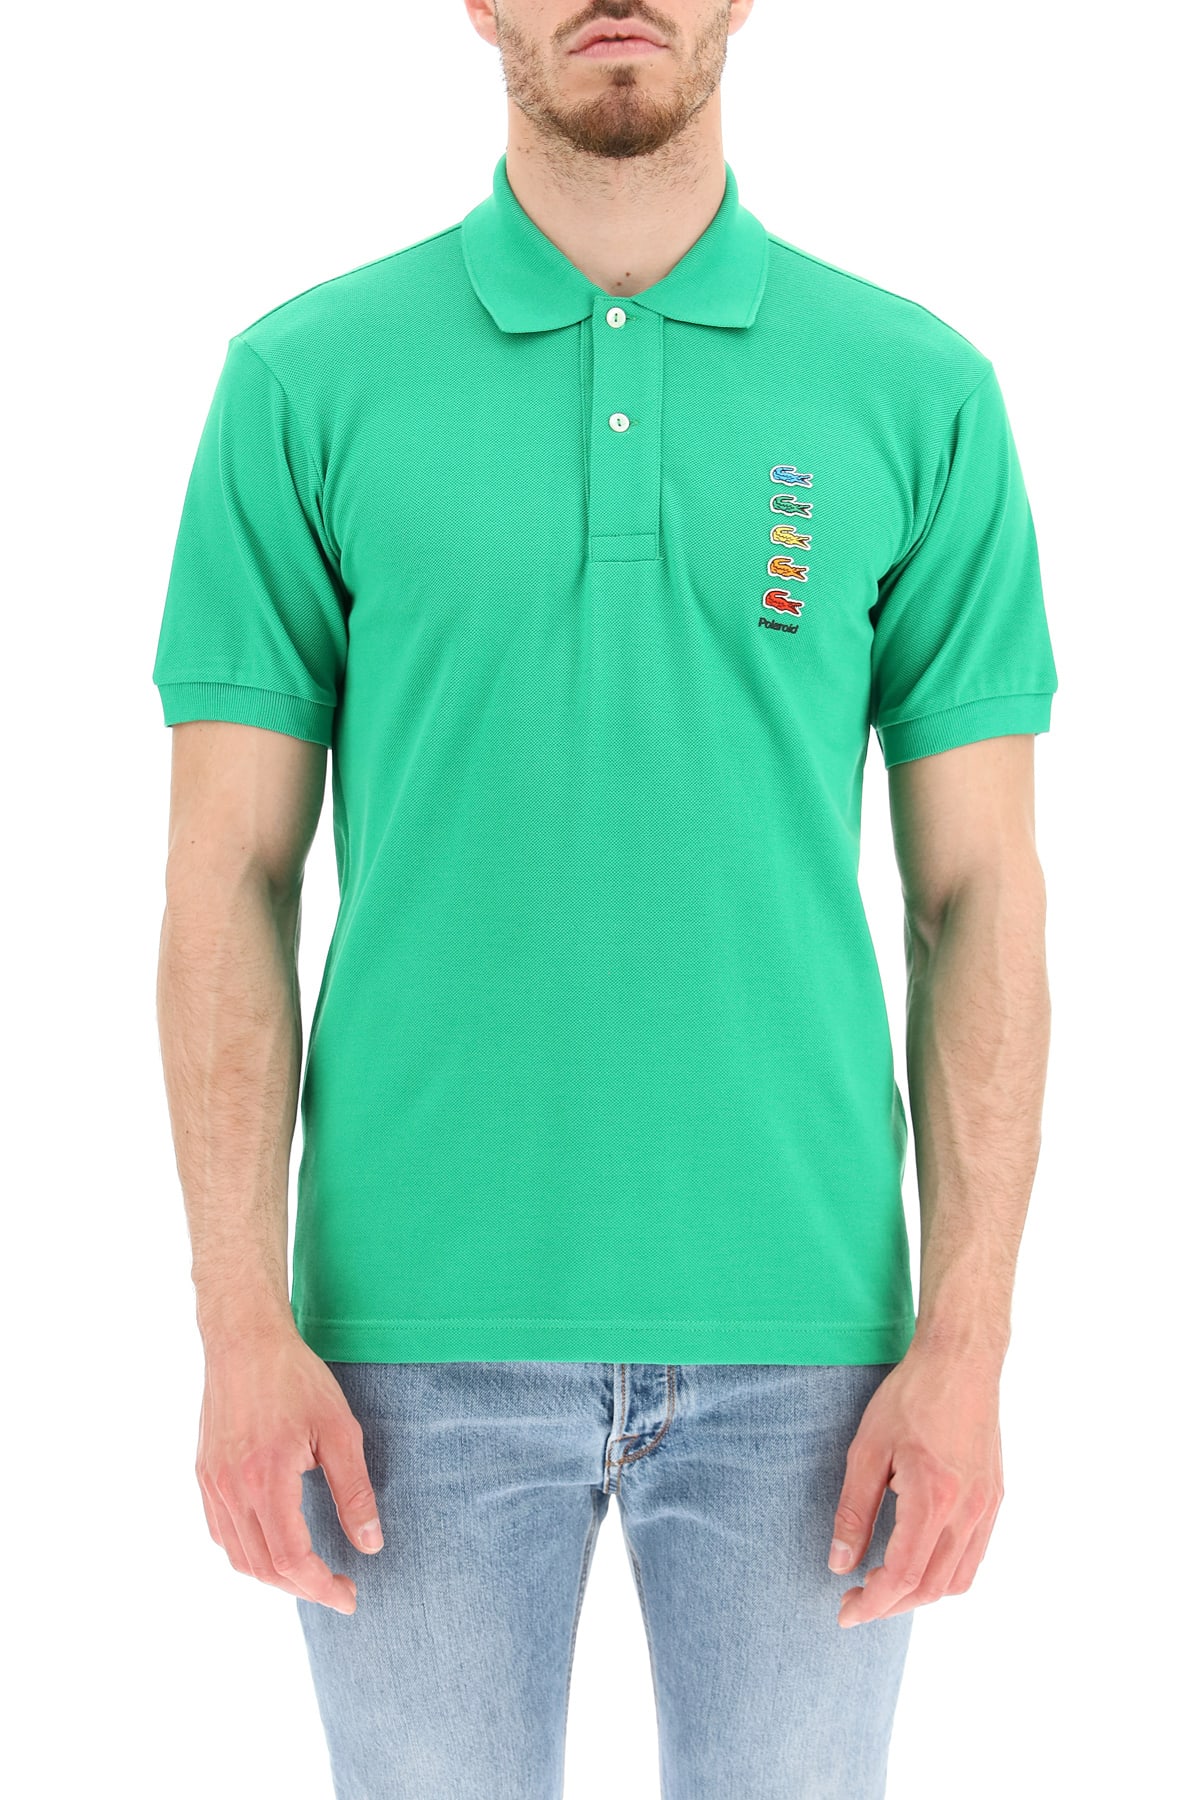 Lacoste Polo Shirt With Colorful Crocodiles